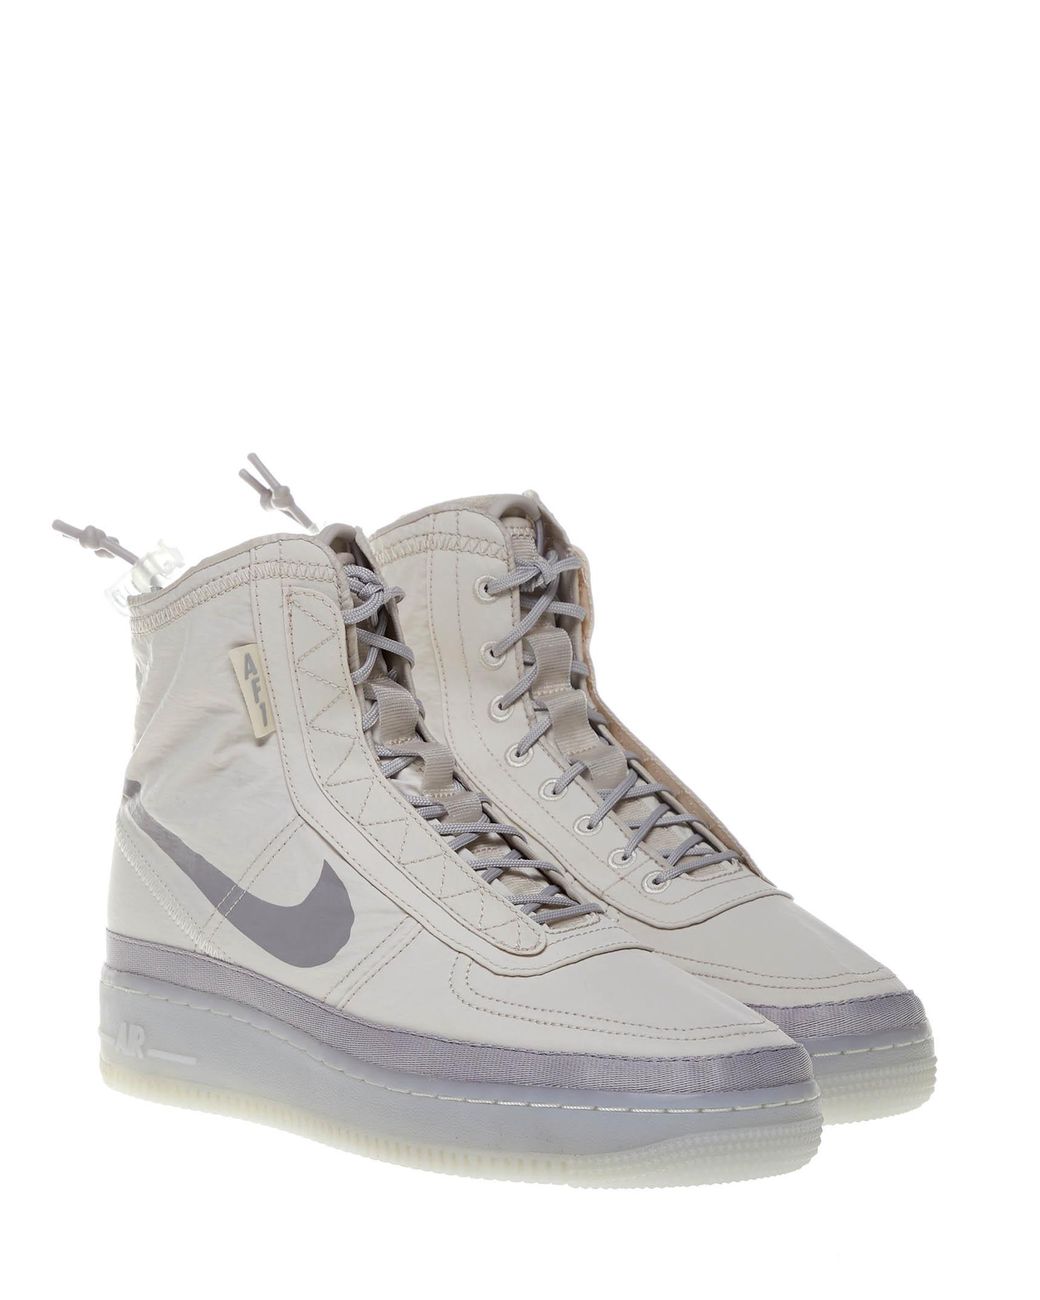 Sneakers alte Air Force 1 Shell color sabbia in tela con coulisse sul  retro. di Nike | Lyst